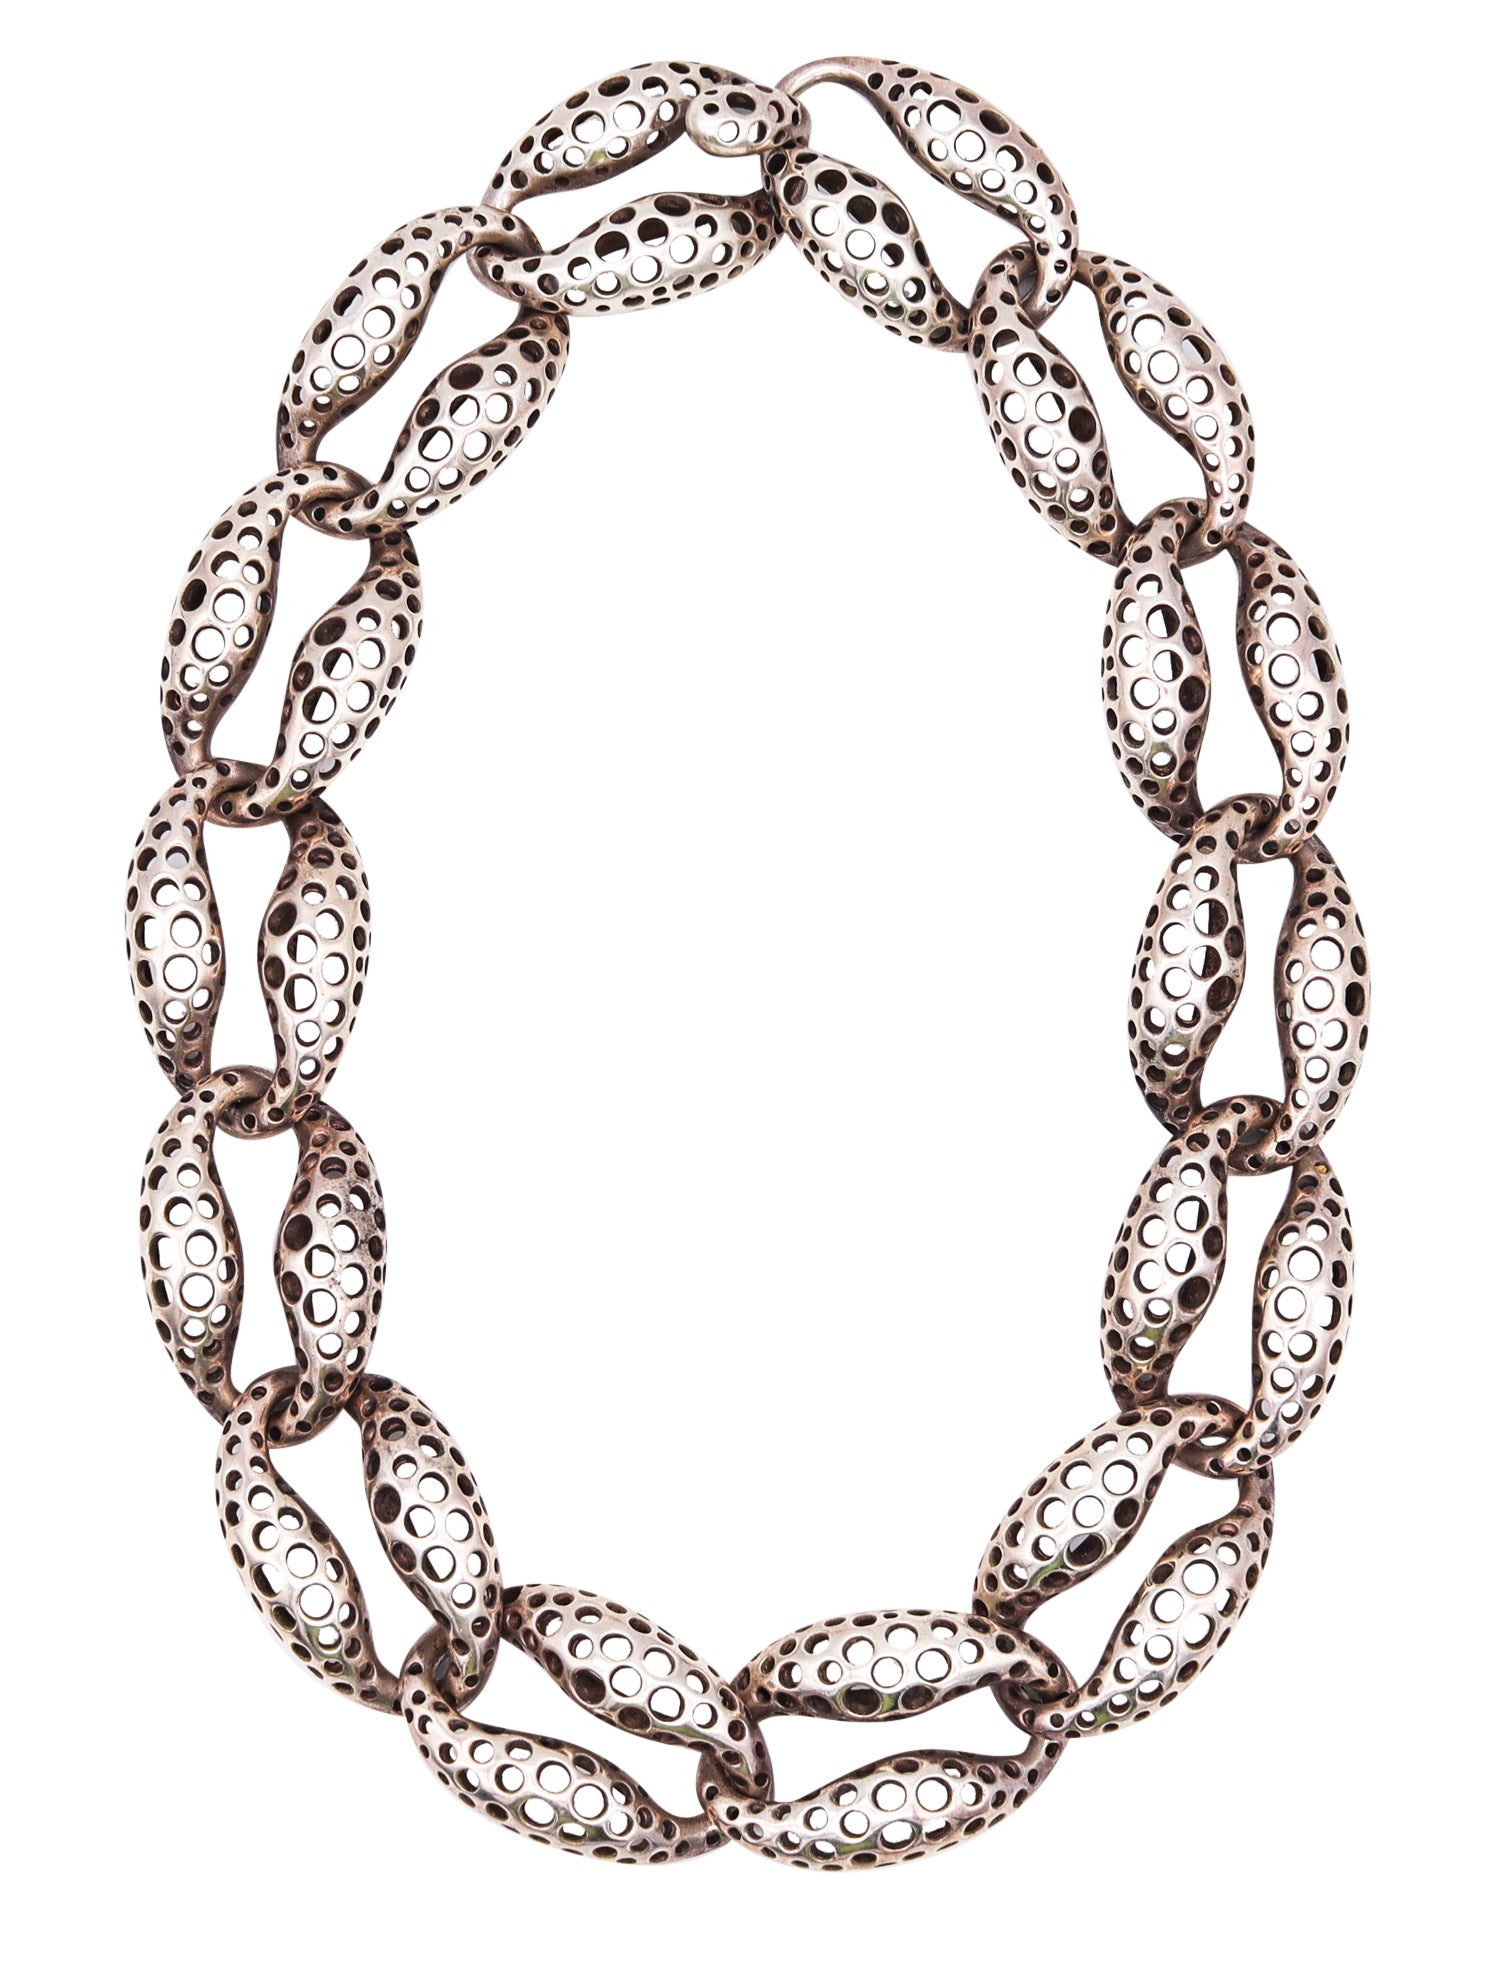 Angela Cummings 1991 Studios Perforations Free-Form Necklace In Solid .925 Sterling Silver